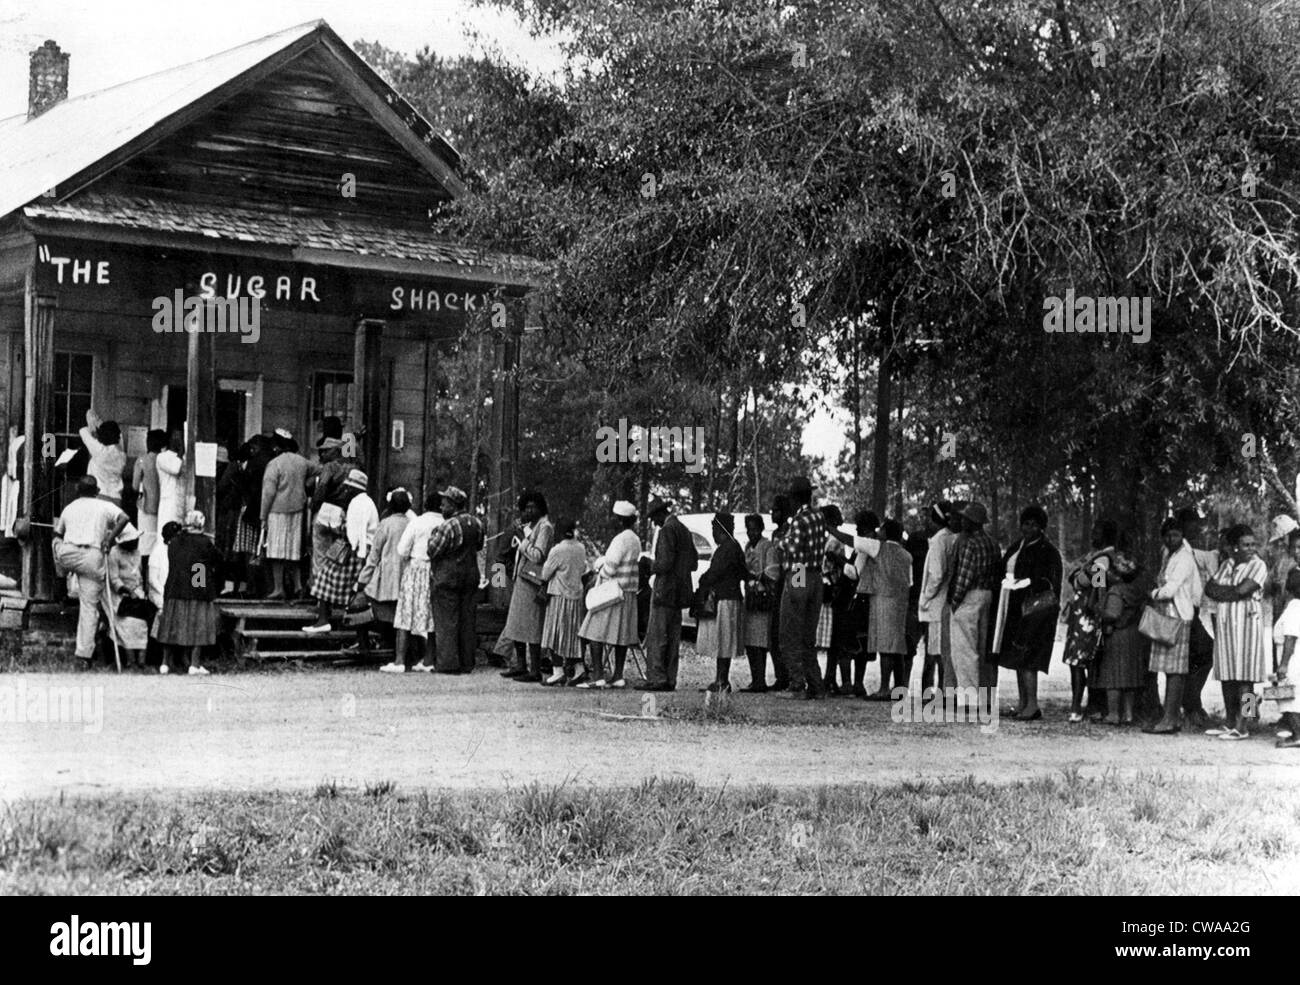 5/3/66--PEACHTREE, ALA--African Americans flock to this polling place in rural, Blackbelt, Alabama 5/3 as they vote in large Stock Photo